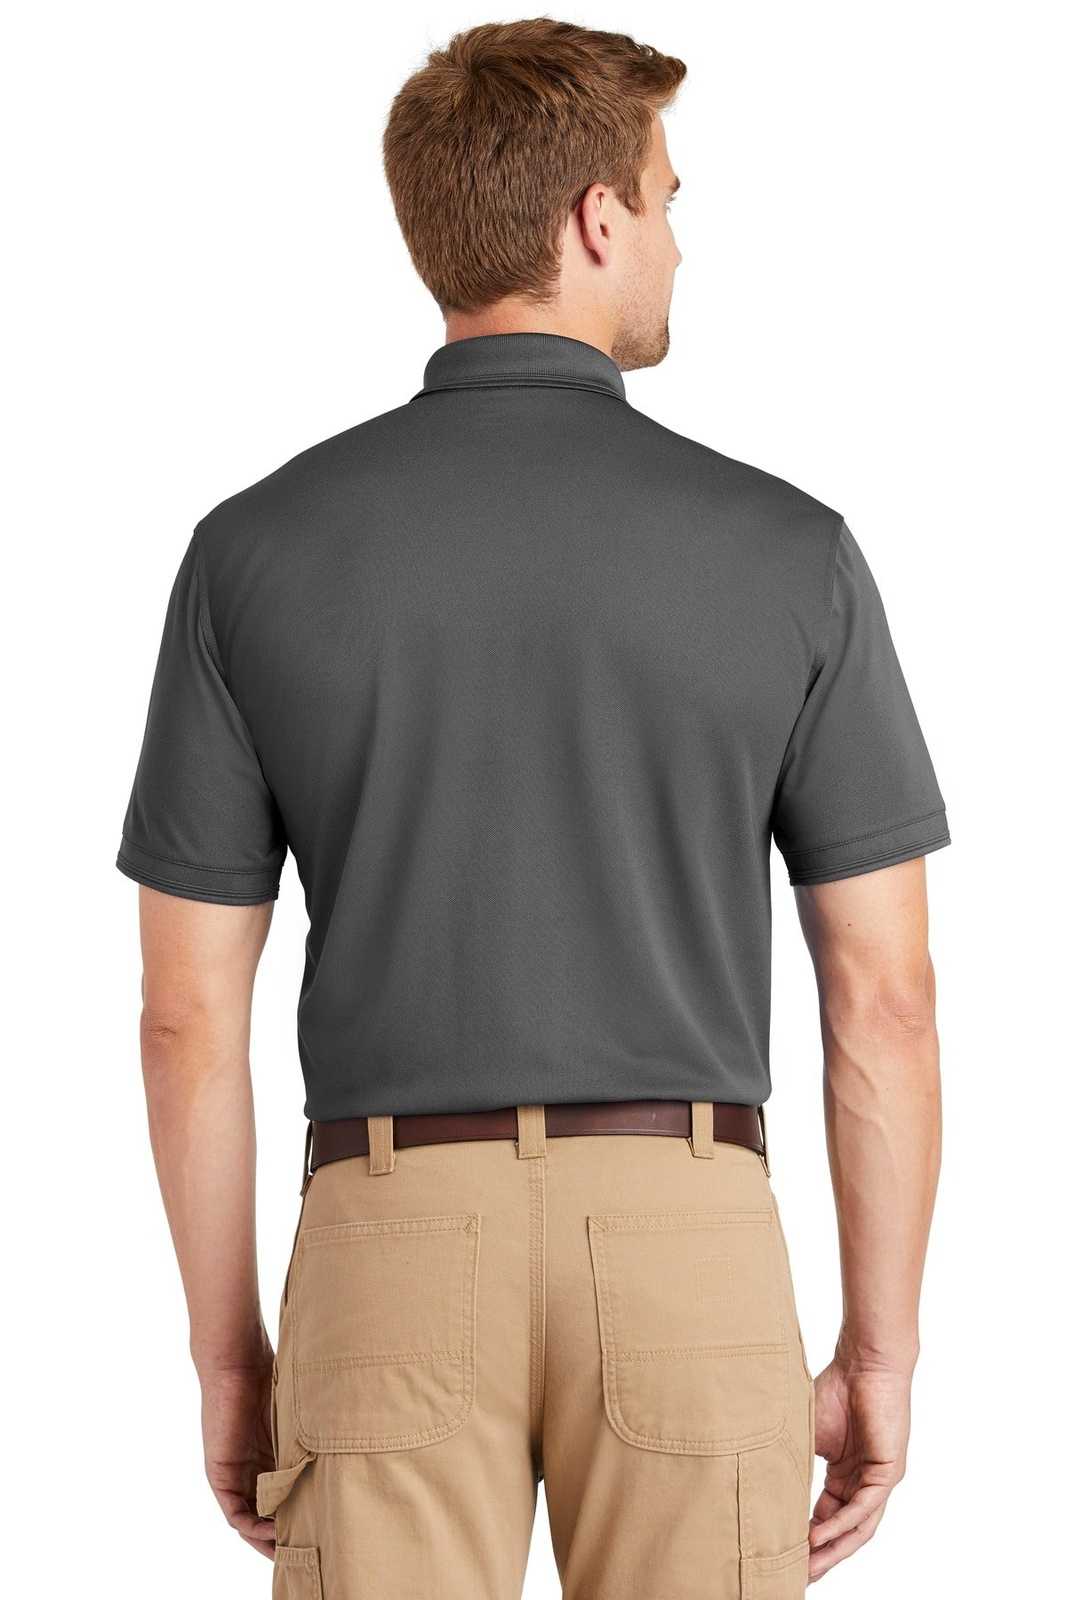 CornerStone CS4020 Industrial Snag-Proof Pique Polo - Charcoal - HIT a Double - 2